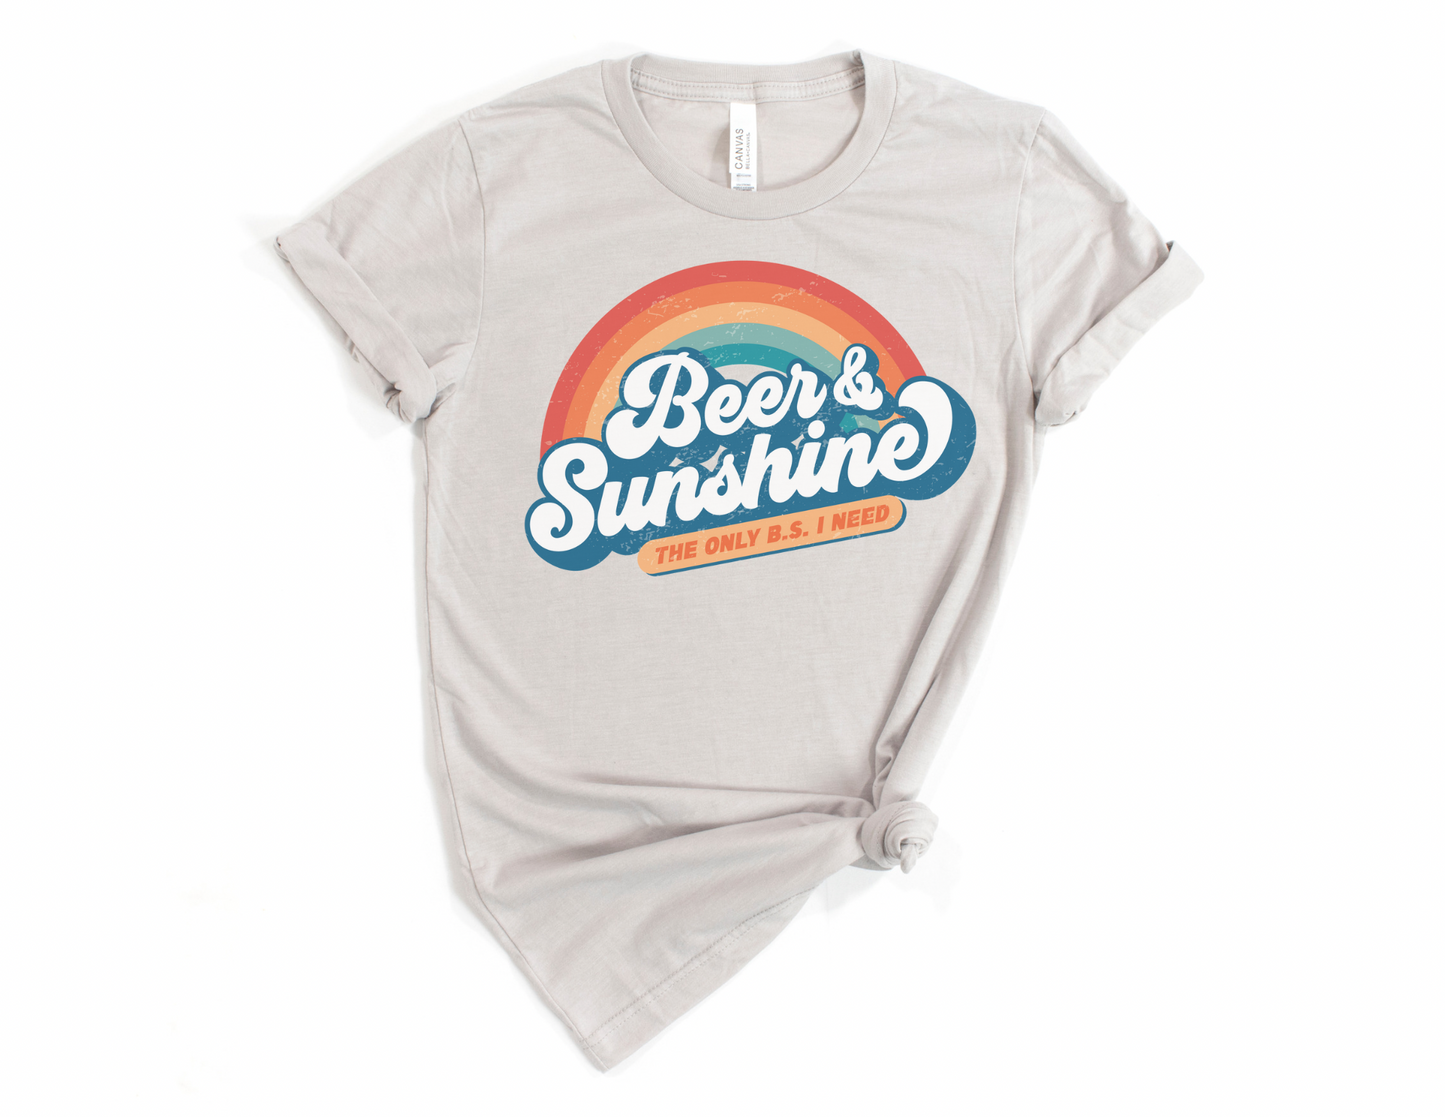 Beer & Sunshine (The Only BS I Need) Shirt